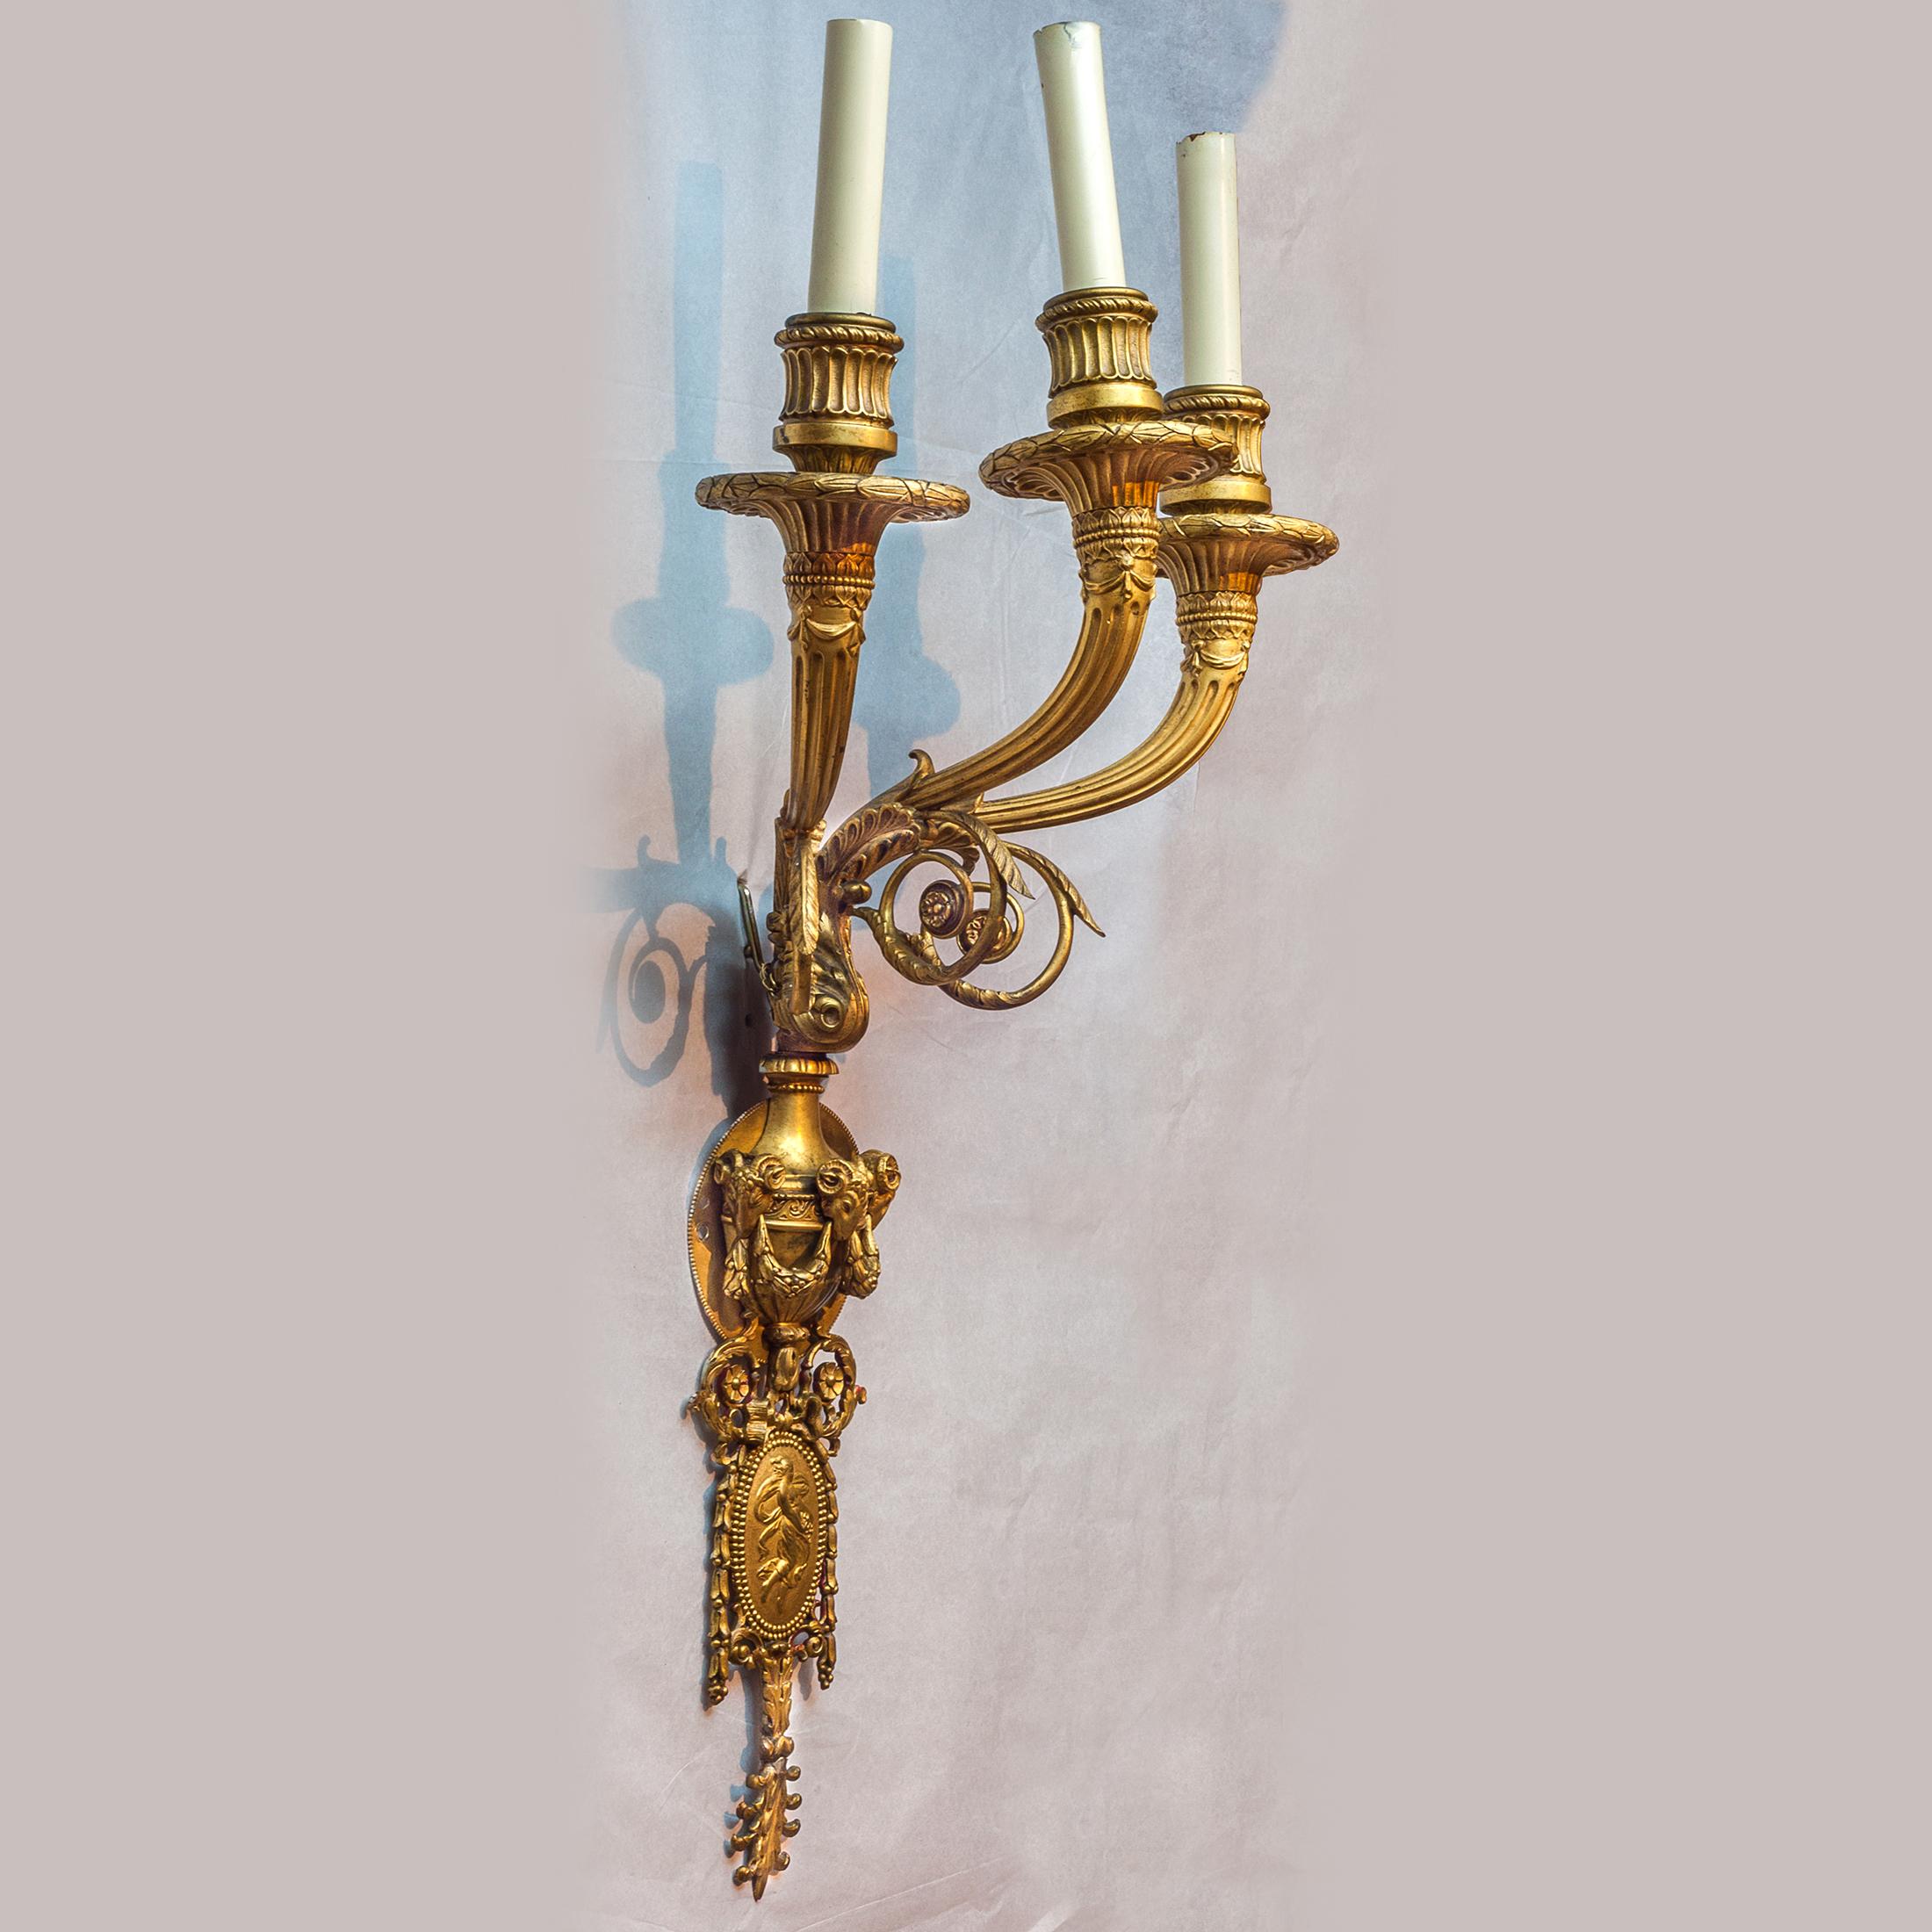 Exquisite pair of three-arm gilt bronze wall sconces.

Maker: attributed to Edward F. Caldwell Co. (1851-1914)
Origin: French/American
Size: 23 x 13 x 8 3/4 inches.